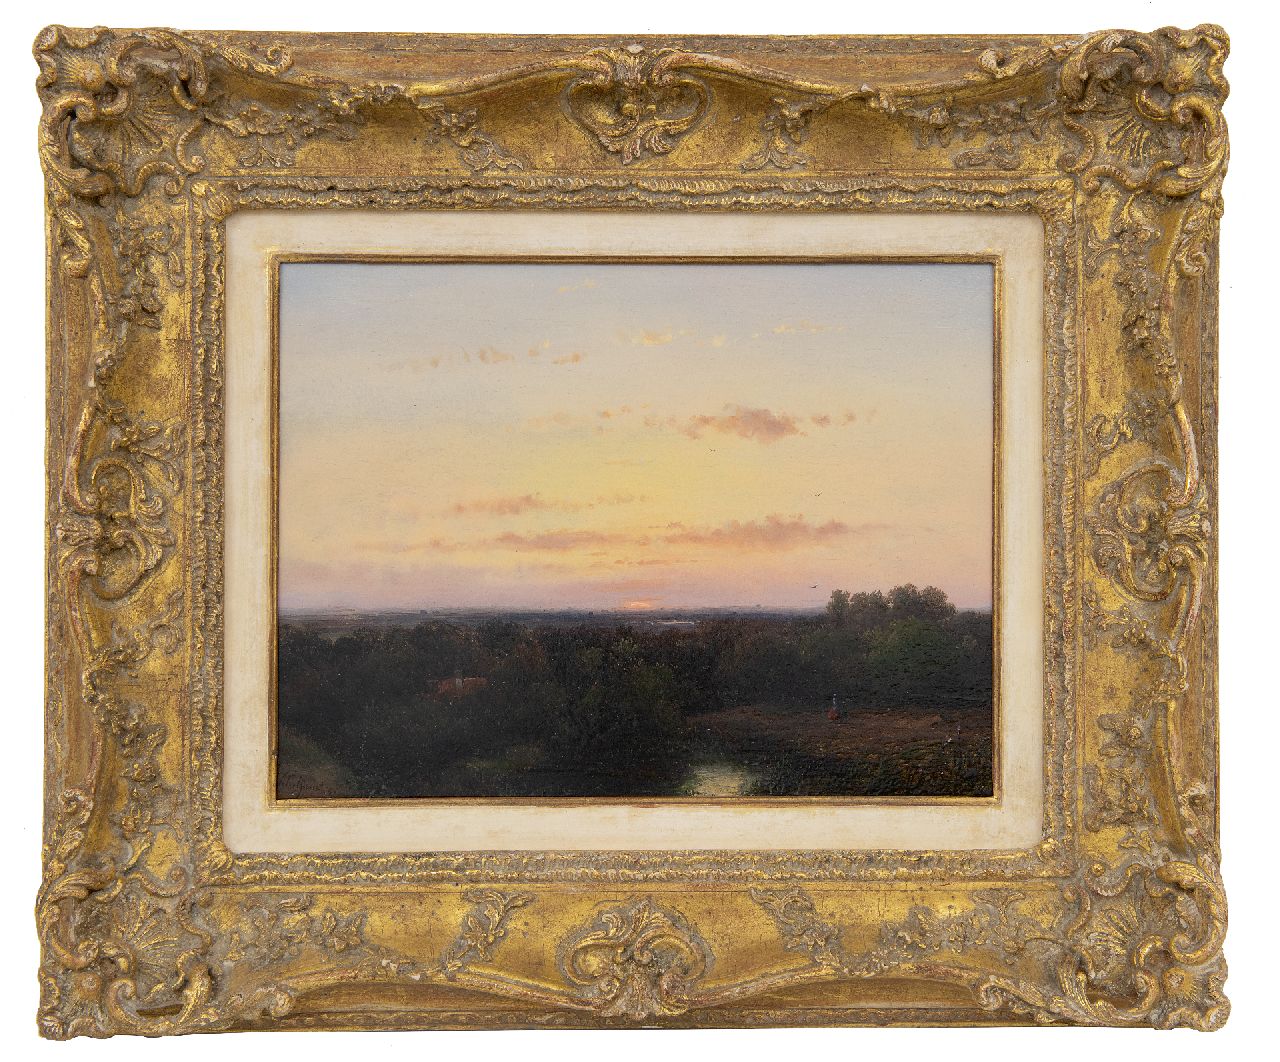 Schelfhout A.  | Andreas Schelfhout | Paintings offered for sale | Panoramic landscape at sunset, oil on panel 21.8 x 29.1 cm, signed l.l. and dated '51